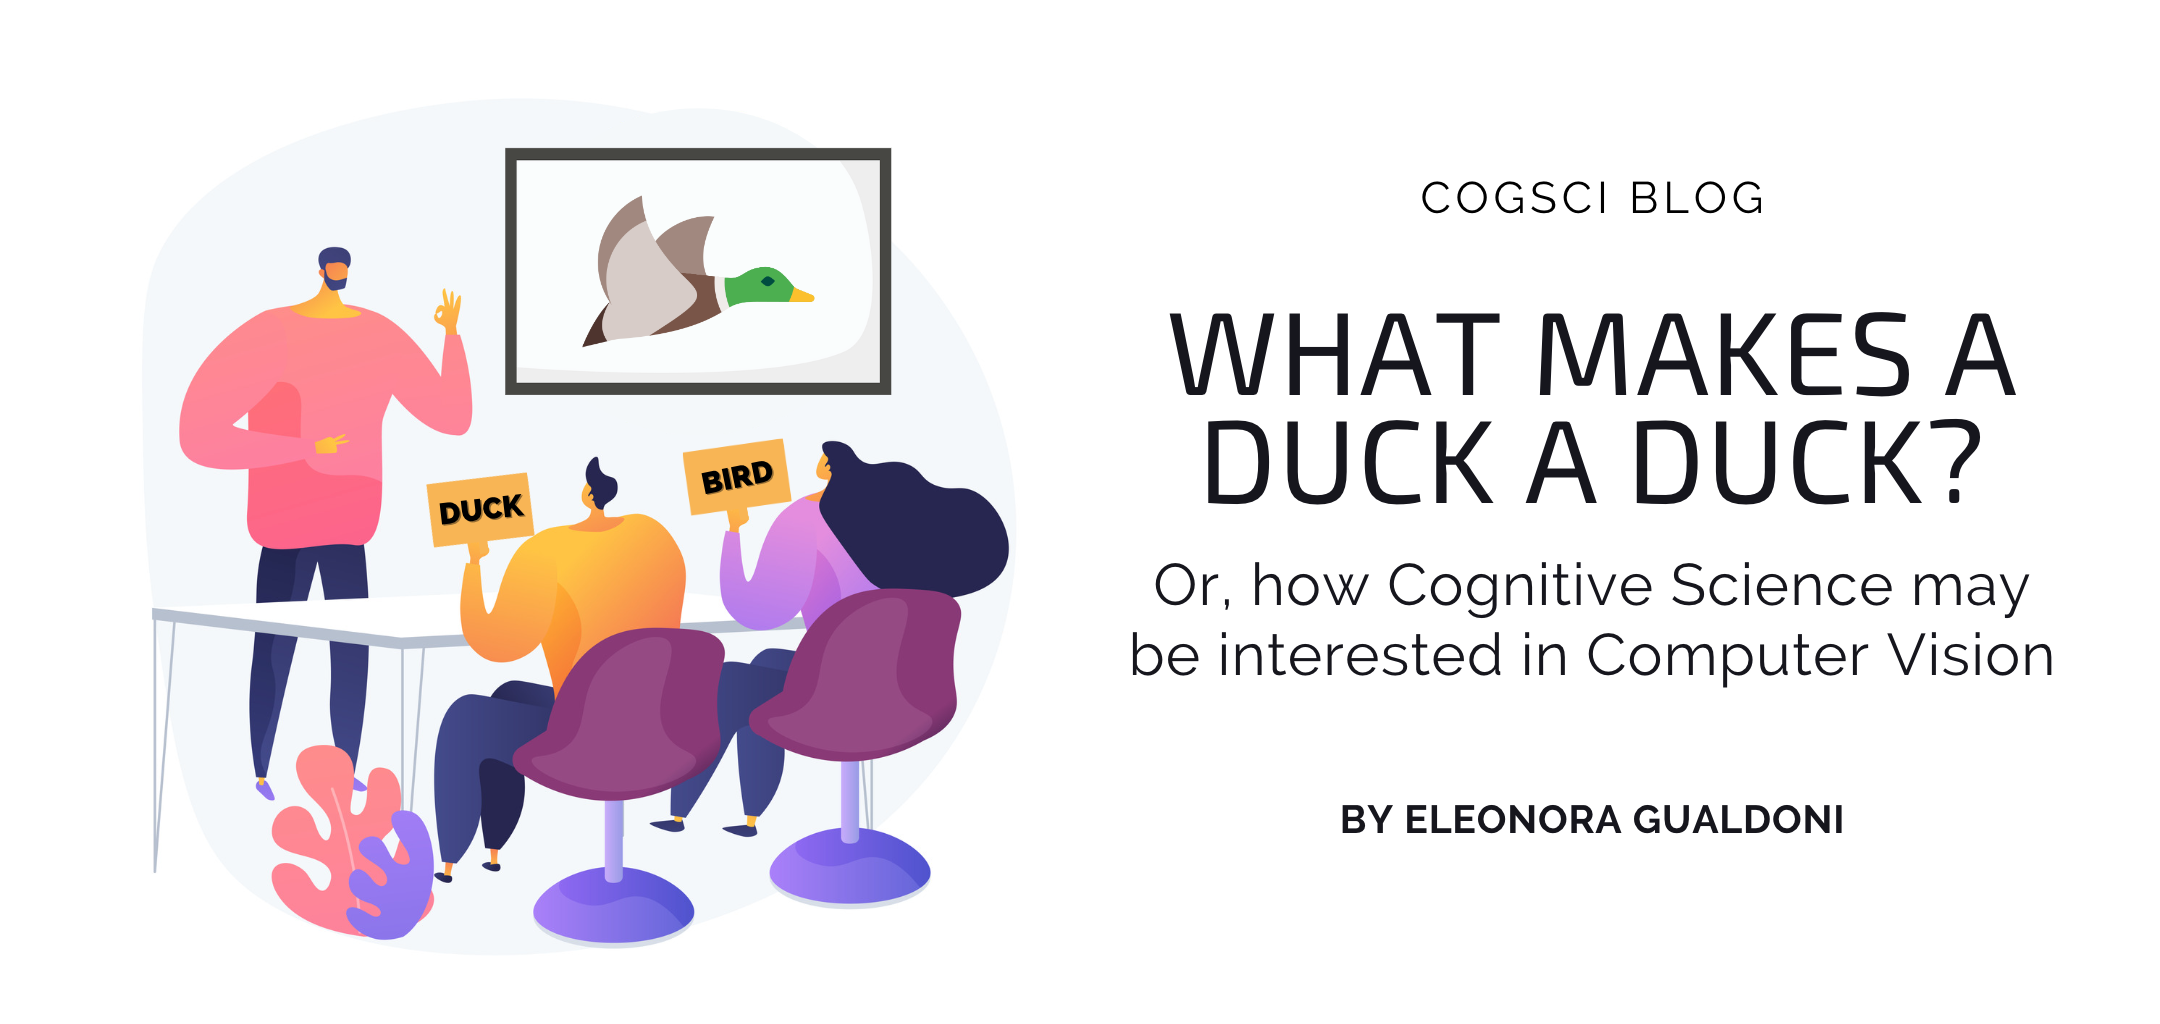 What makes a duck a duck?